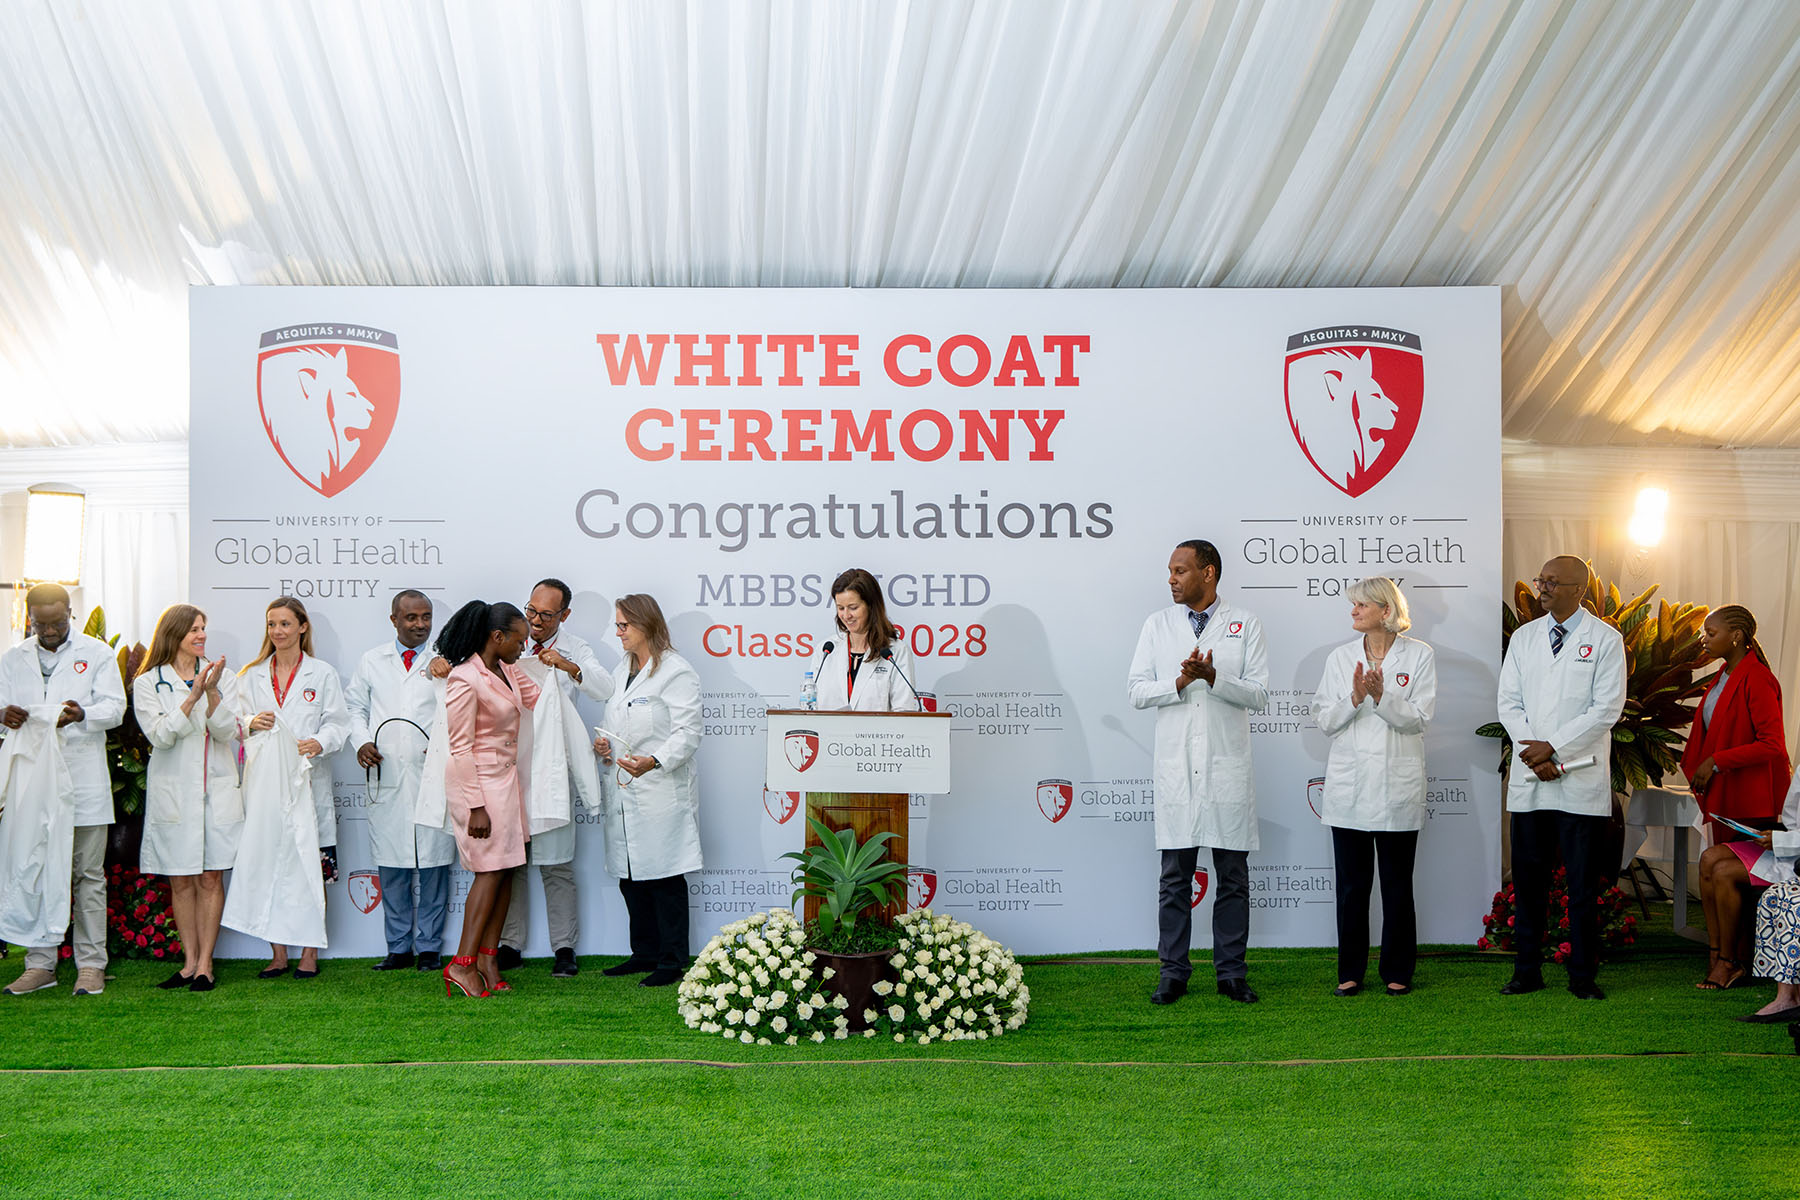 Person standing at a podium speaking flanked by people wearing lab coats. The tarp behind them reads, "White Coat Ceremony - Celebration."